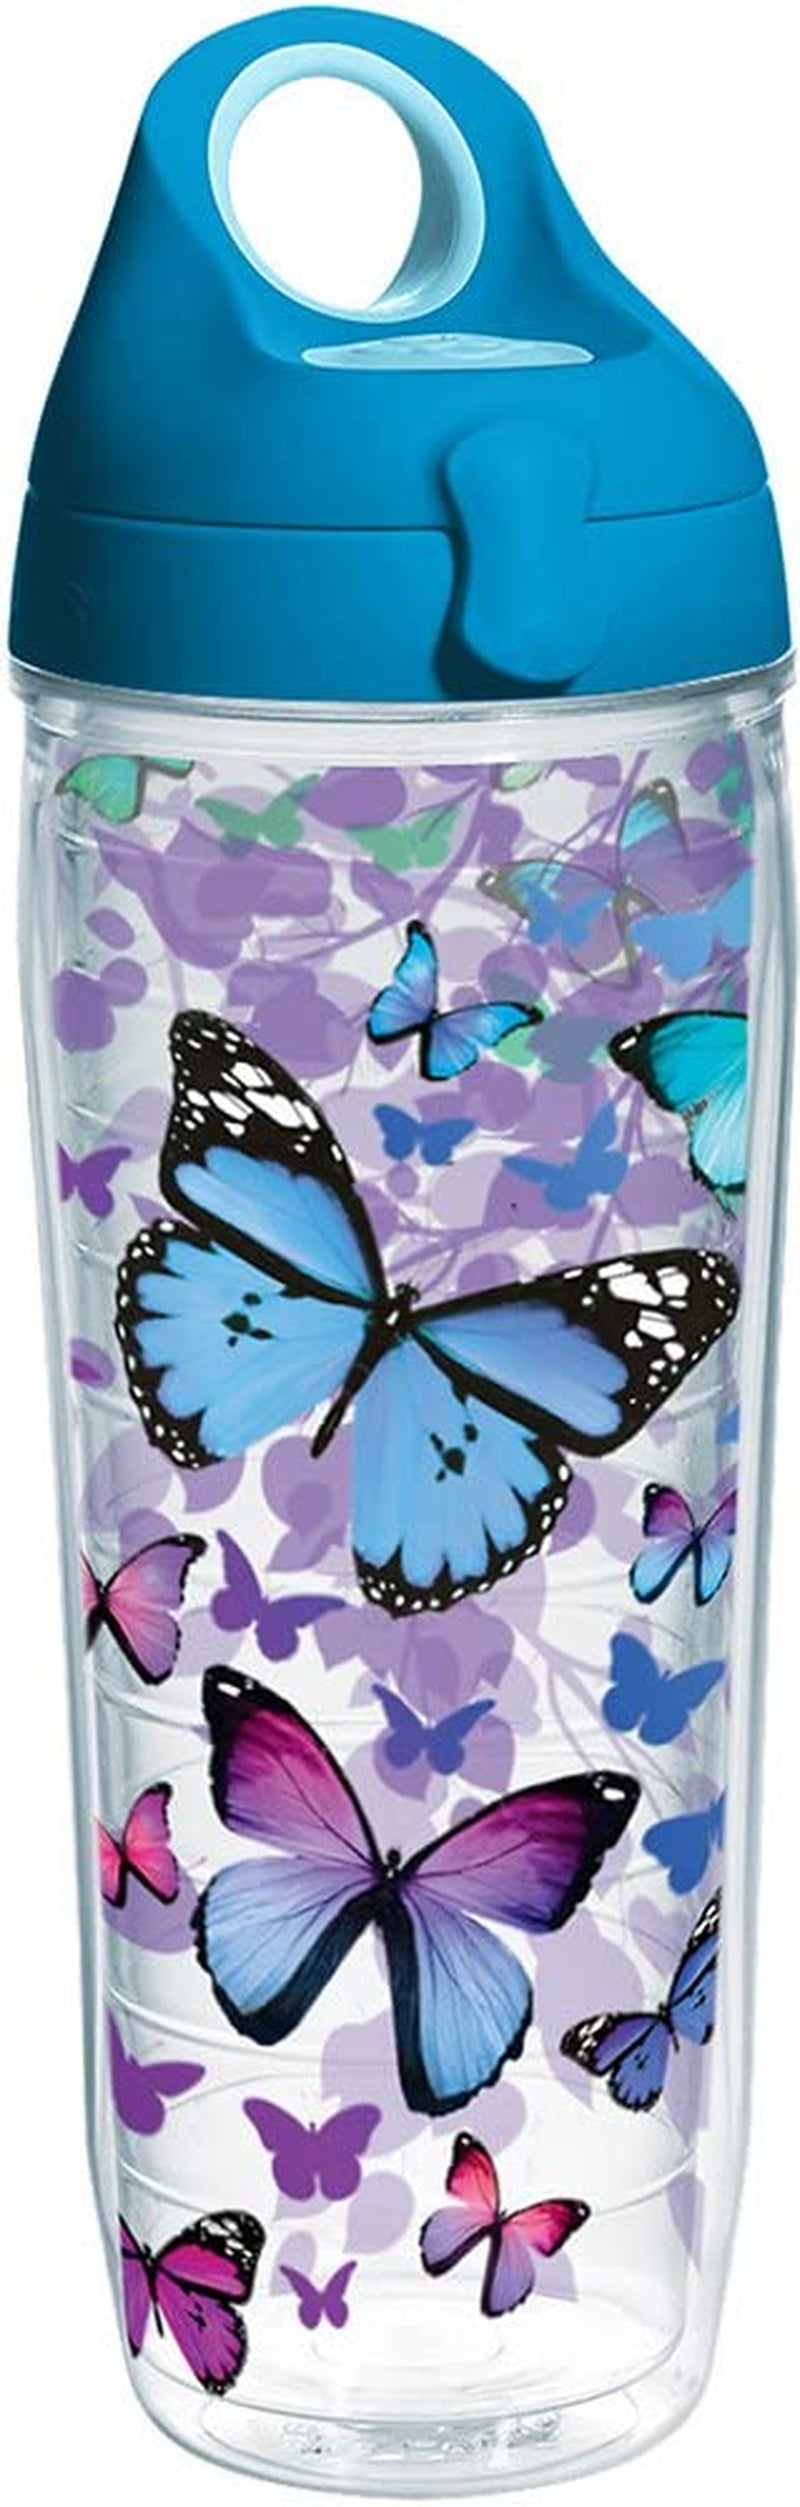 Tervis Blue Endless Butterfly Insulated Tumbler with Wrap and Turquoise Lid, 16Oz, Clear